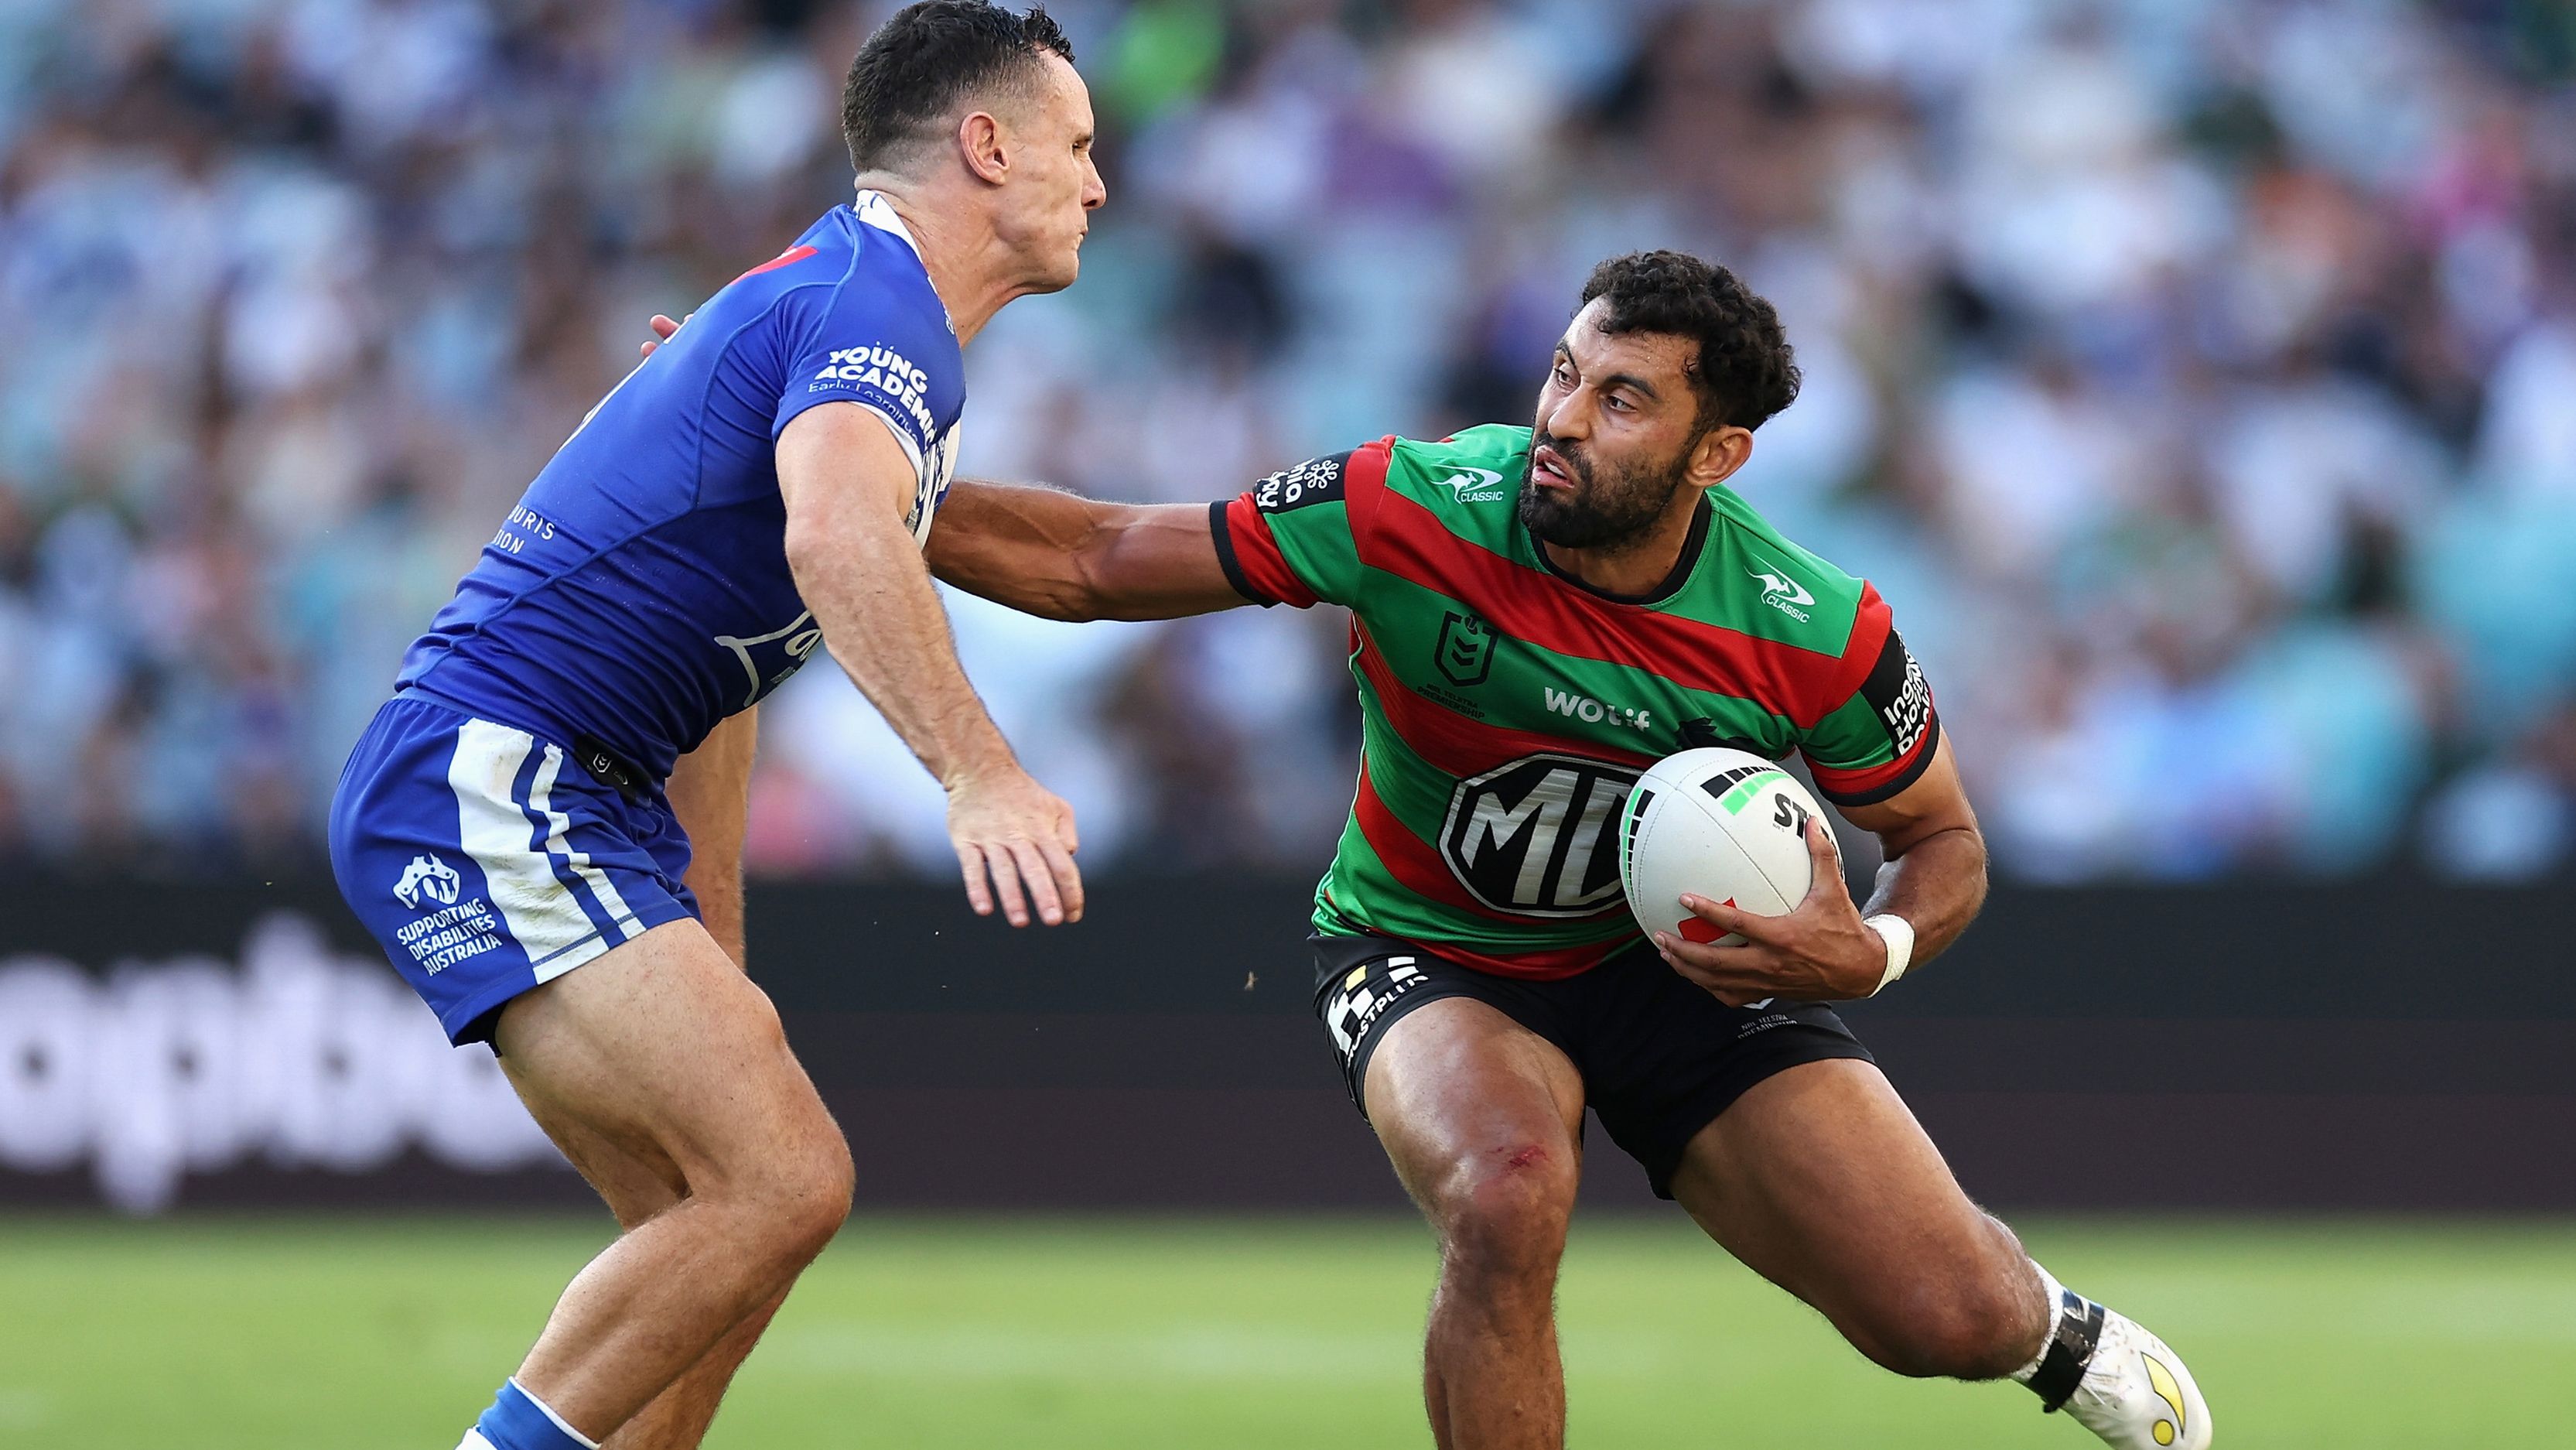 Alex Johnston is tackled during the round four NRL match between the South Sydney Rabbitohs and the Canterbury Bulldogs.